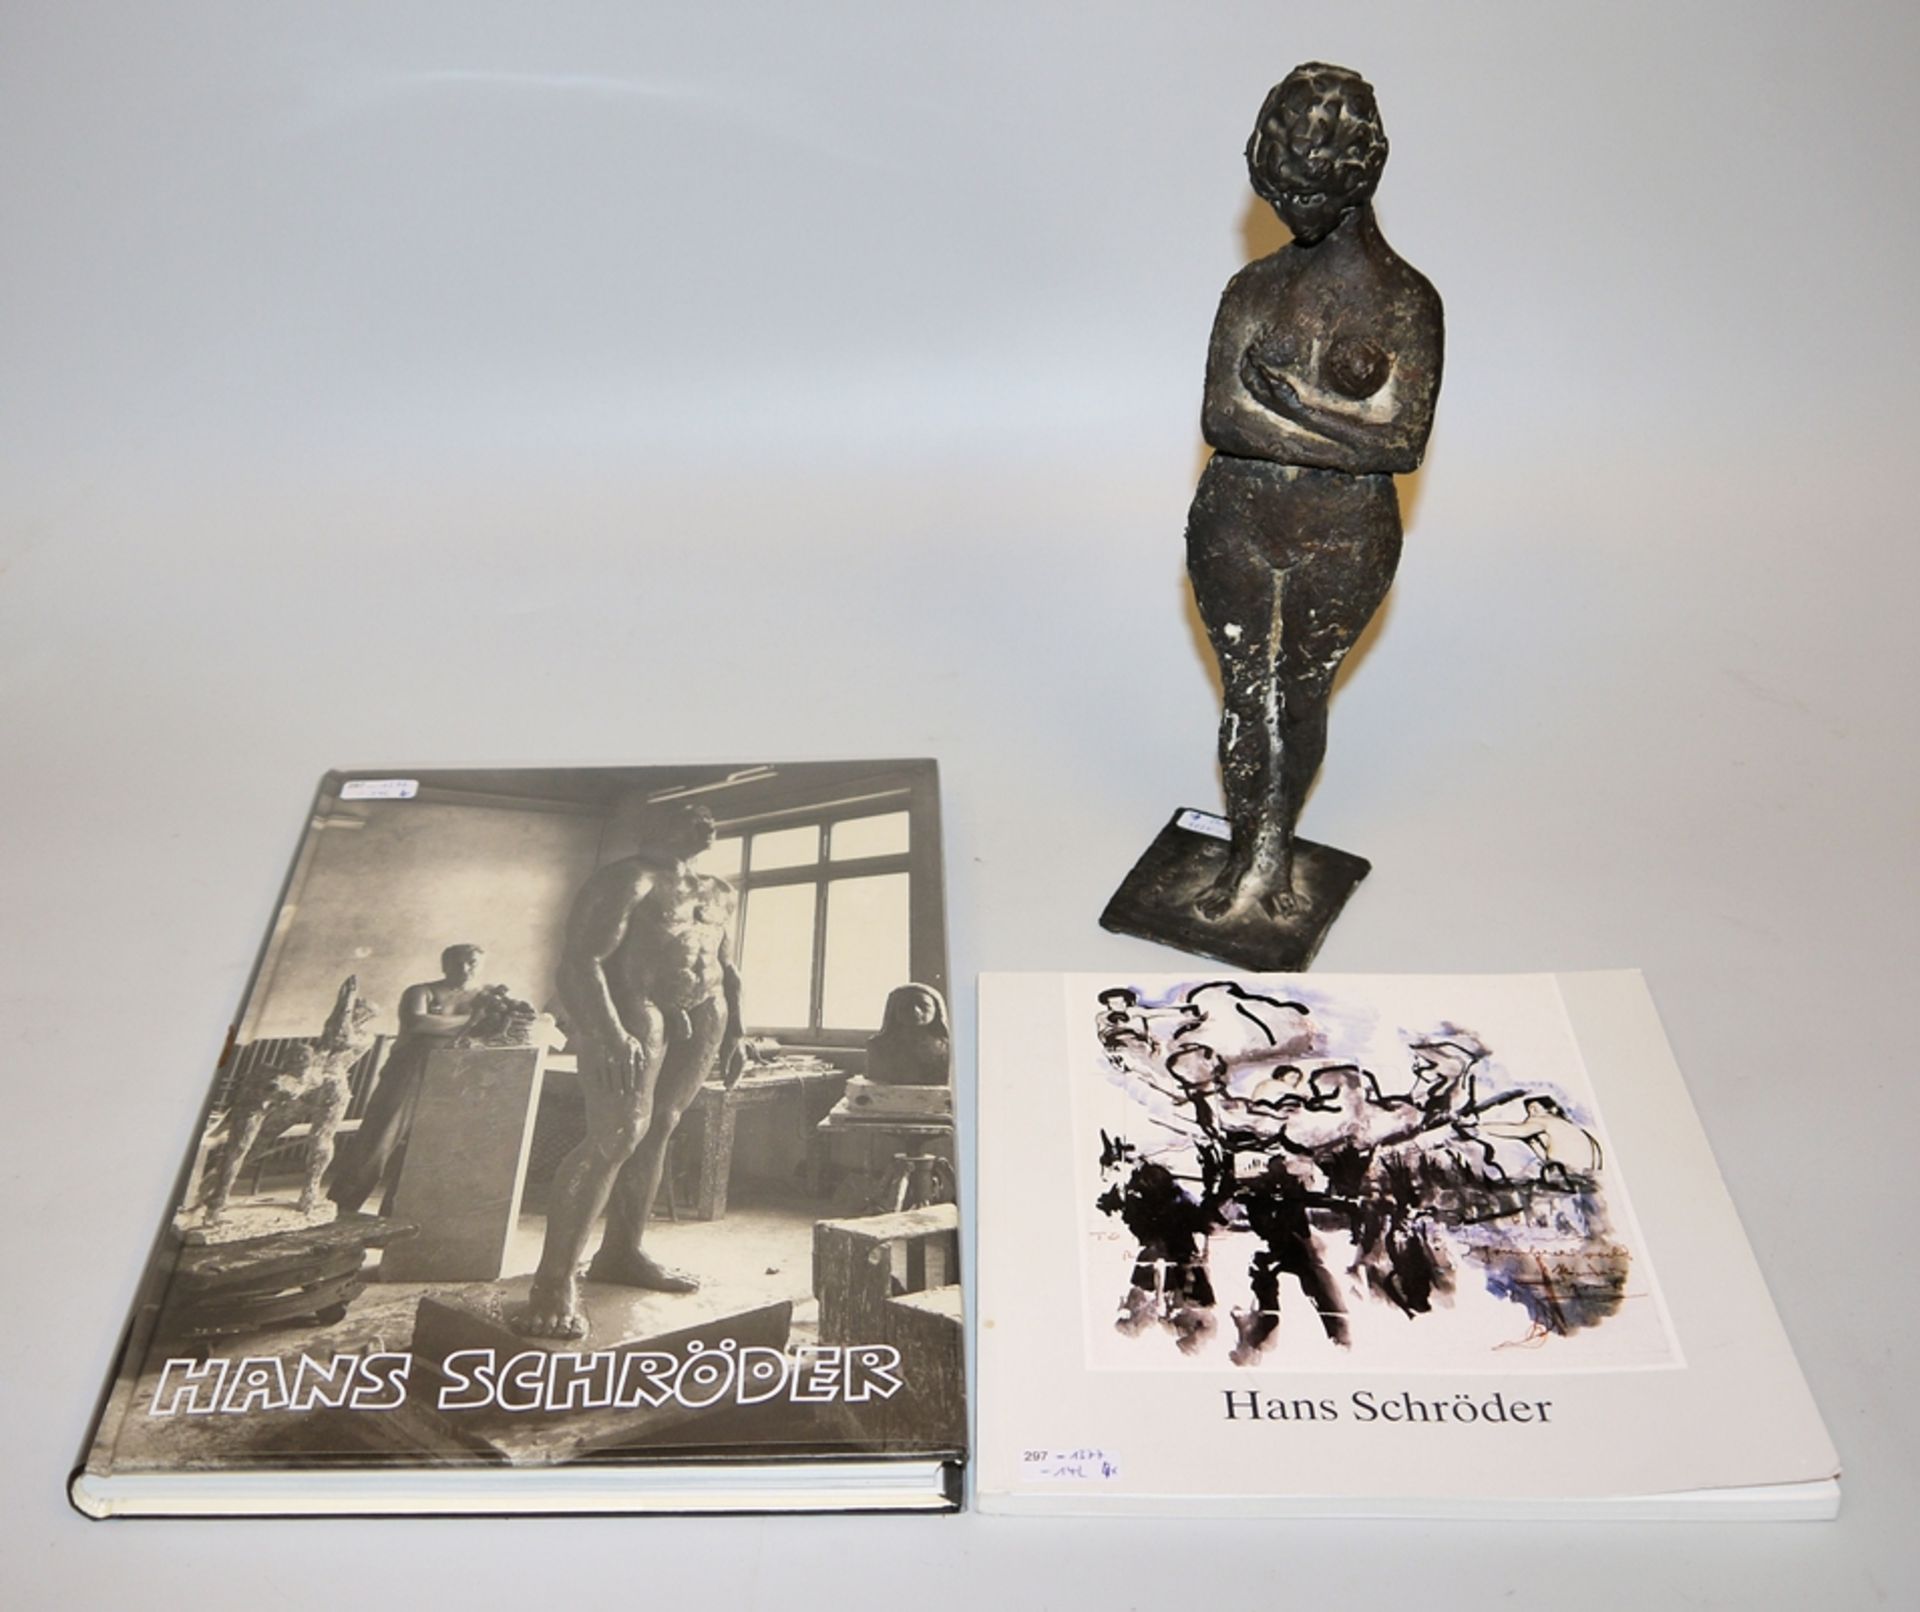 Hans Schröder, Standing female nude, bronze sculpture from 1969, plus large, sign. Photo-litho coll